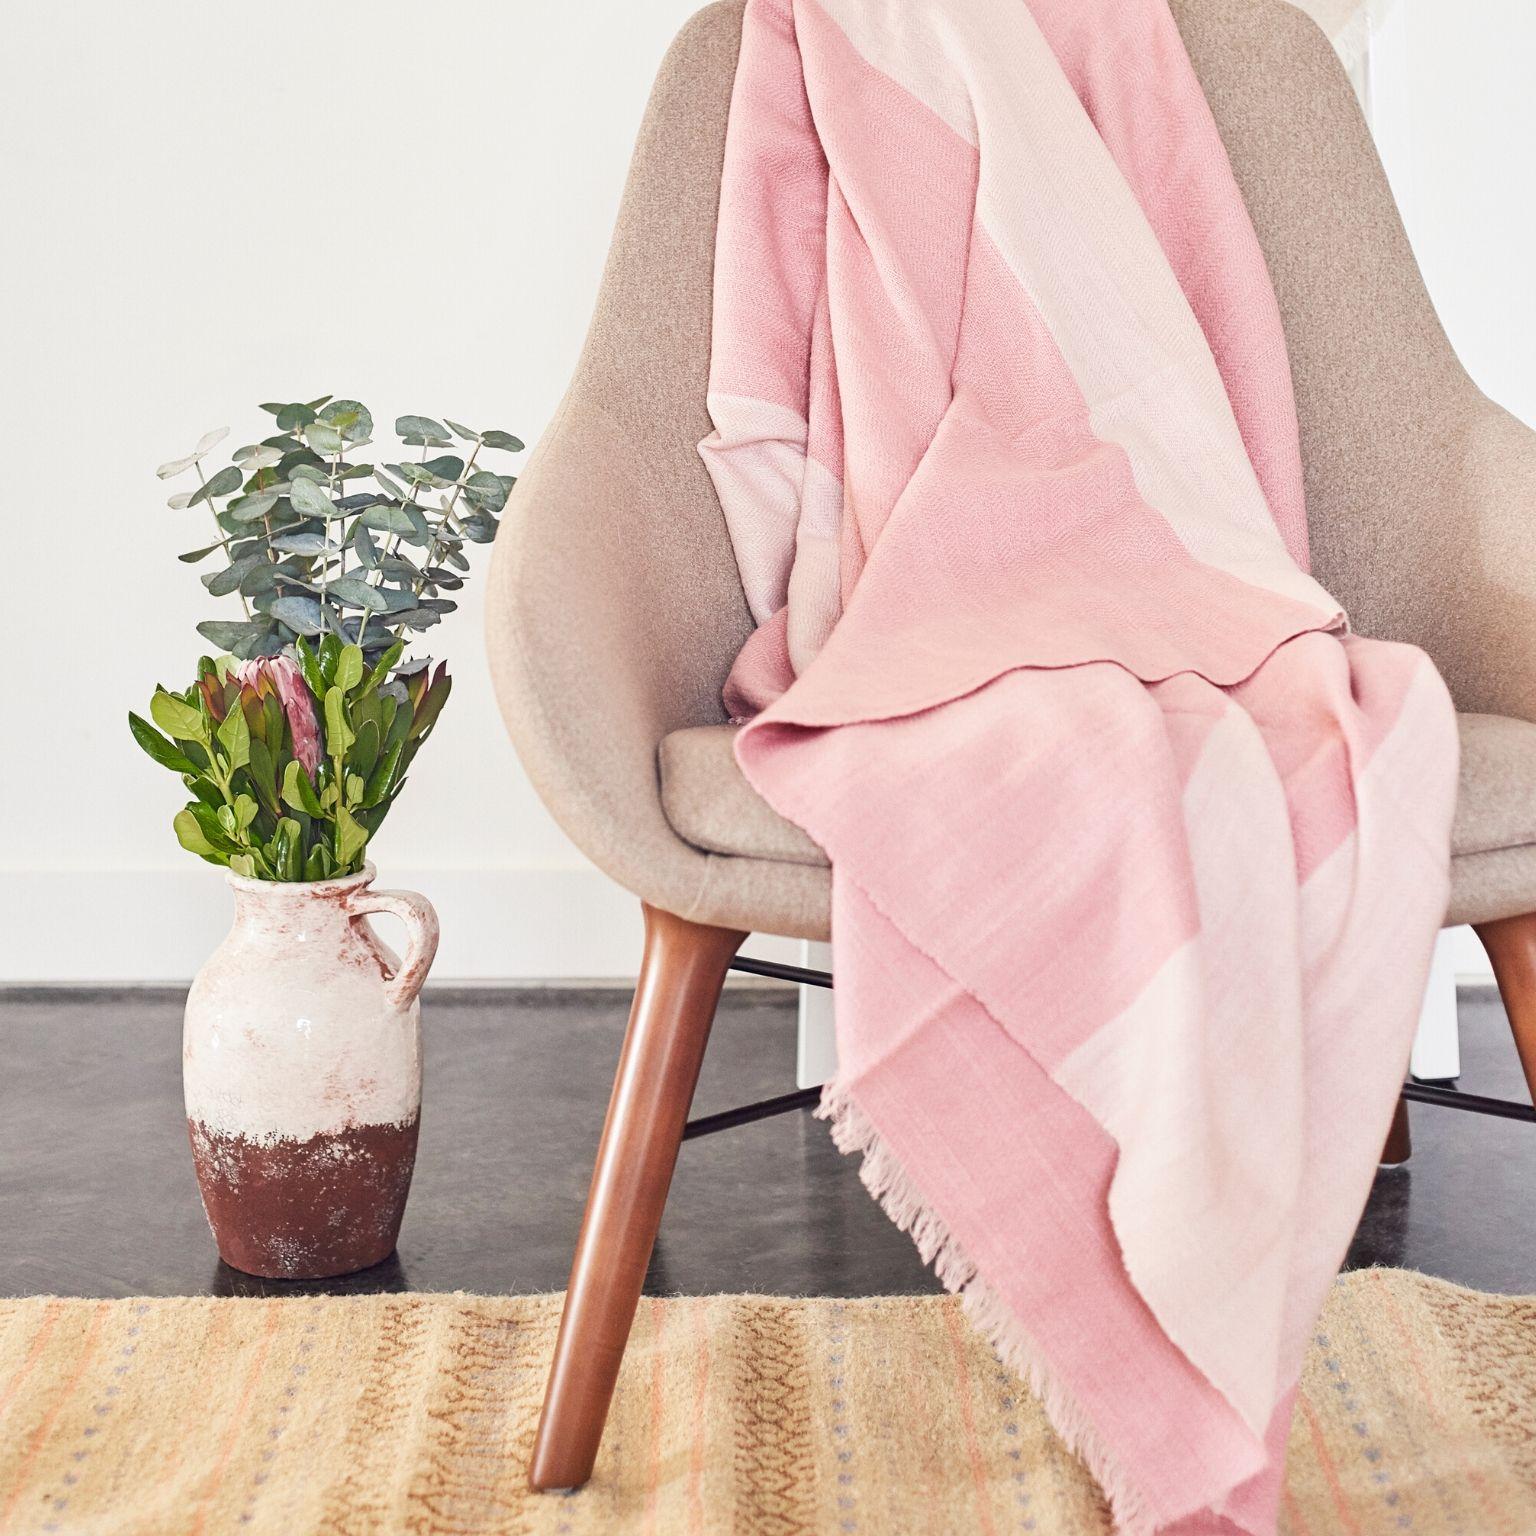 Hand-Woven Soft Merino Rosa Large Plush Throw / Queen Bedspread / Coverlet In Pastel Pink For Sale